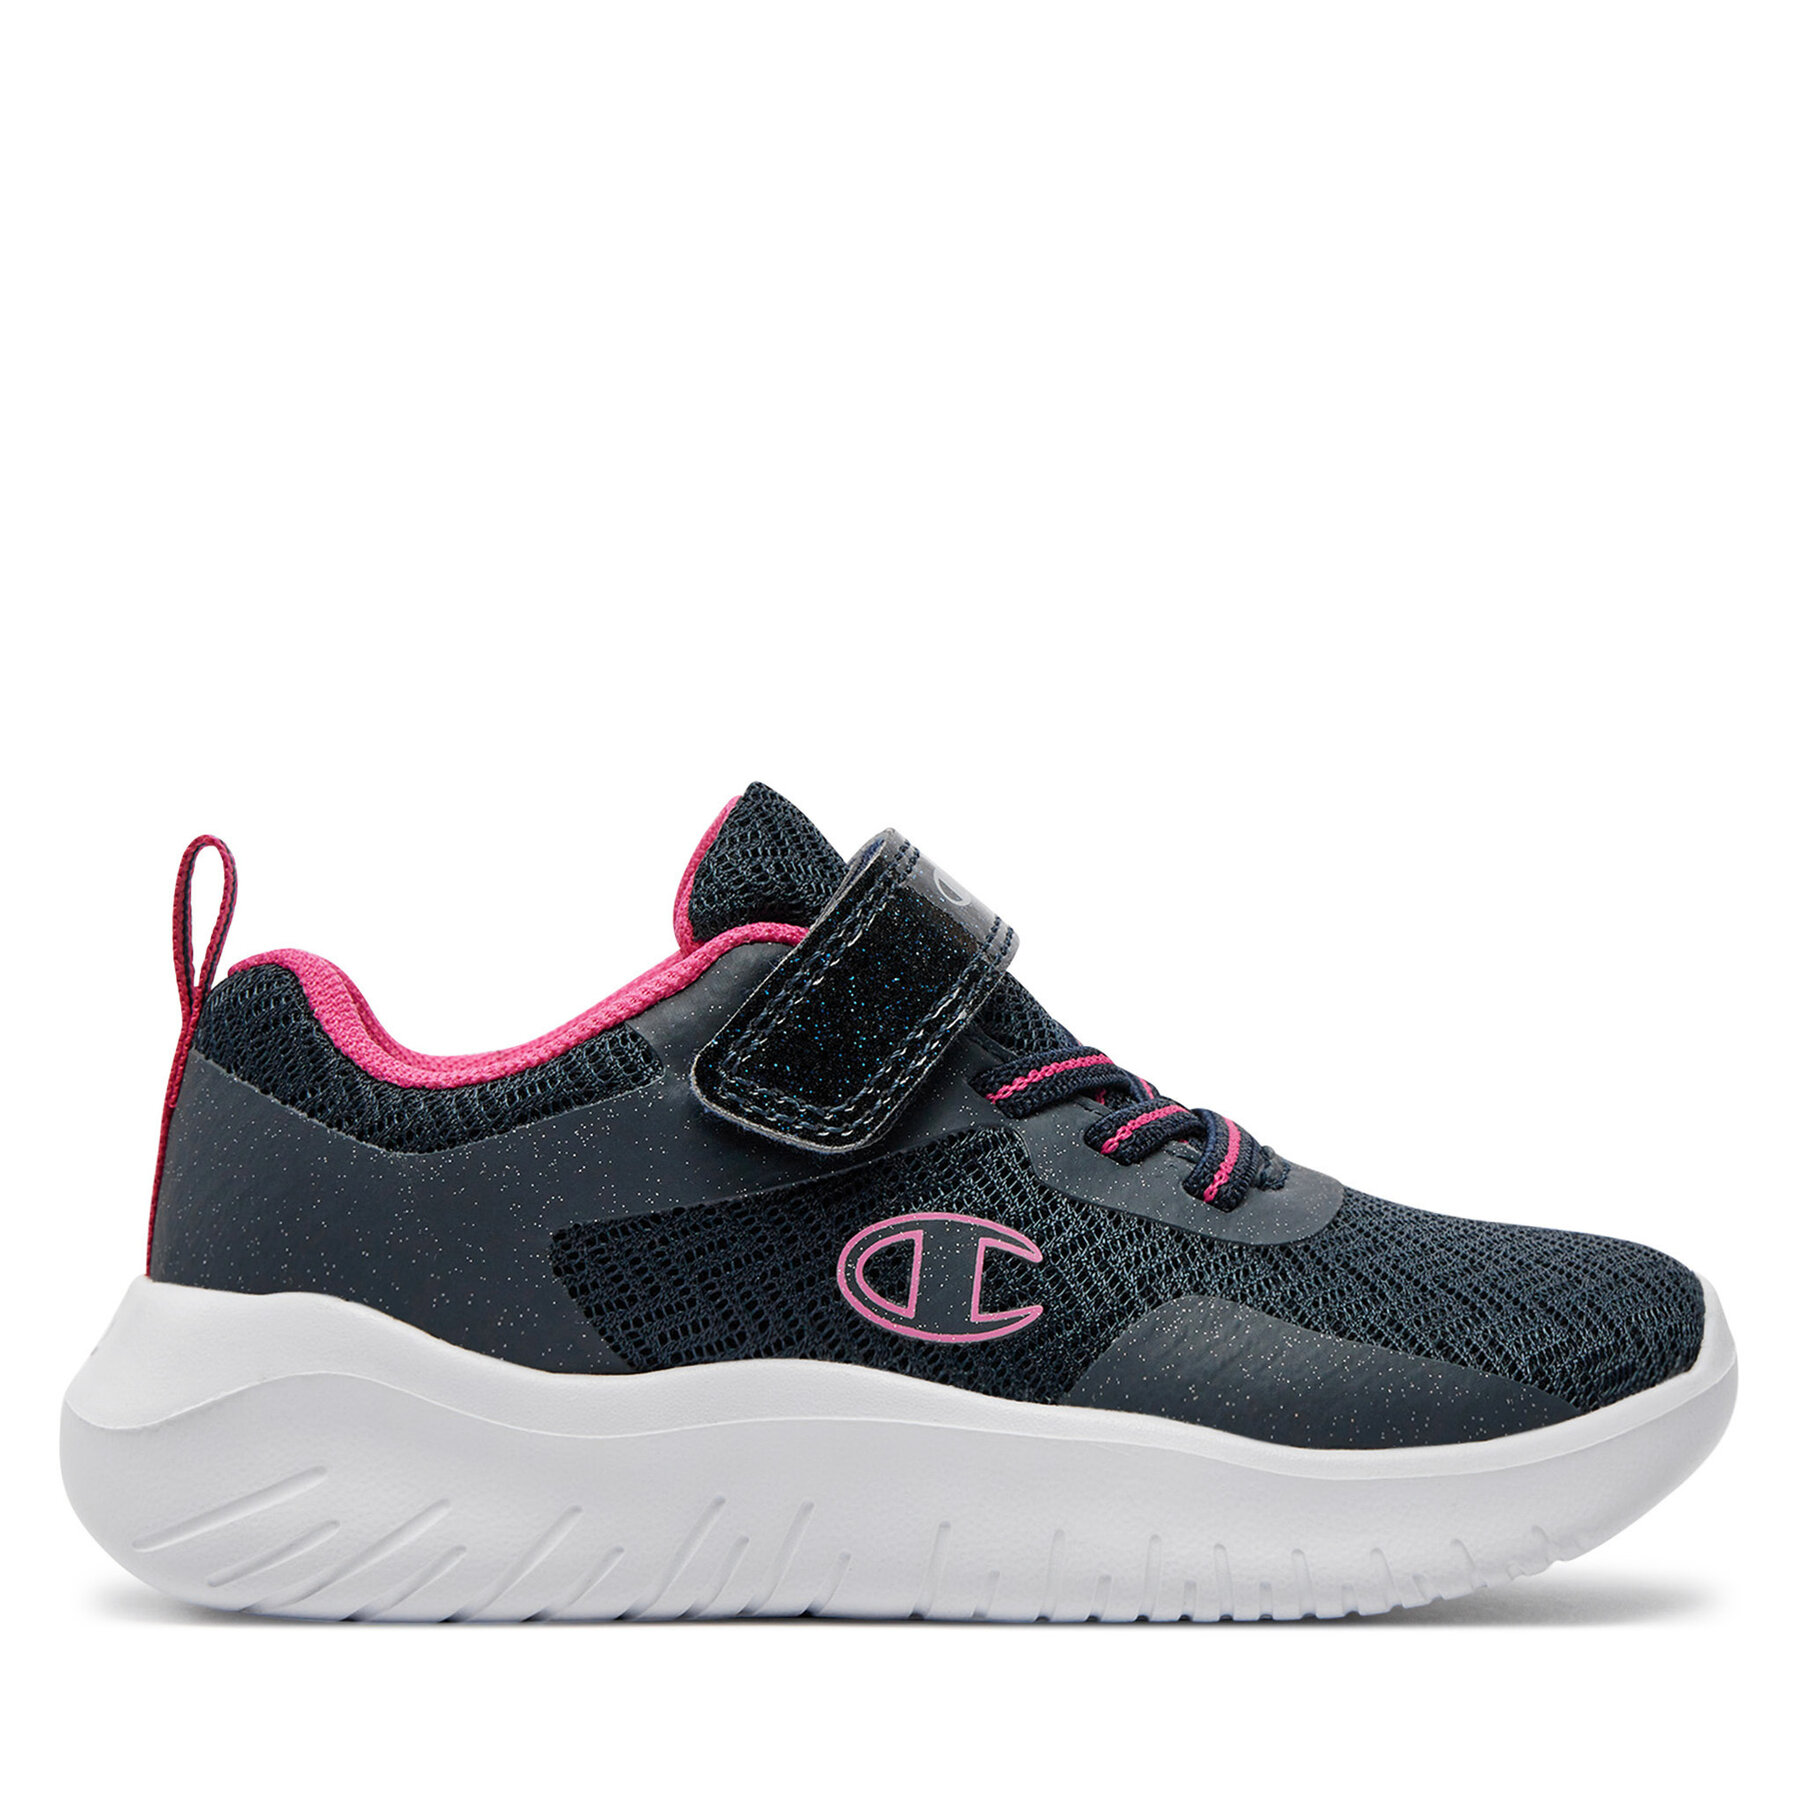 Sneakers Champion Softy Evolve G Ps Low Cut Shoe S32532-CHA-BS501 Nny/Fucsia von Champion